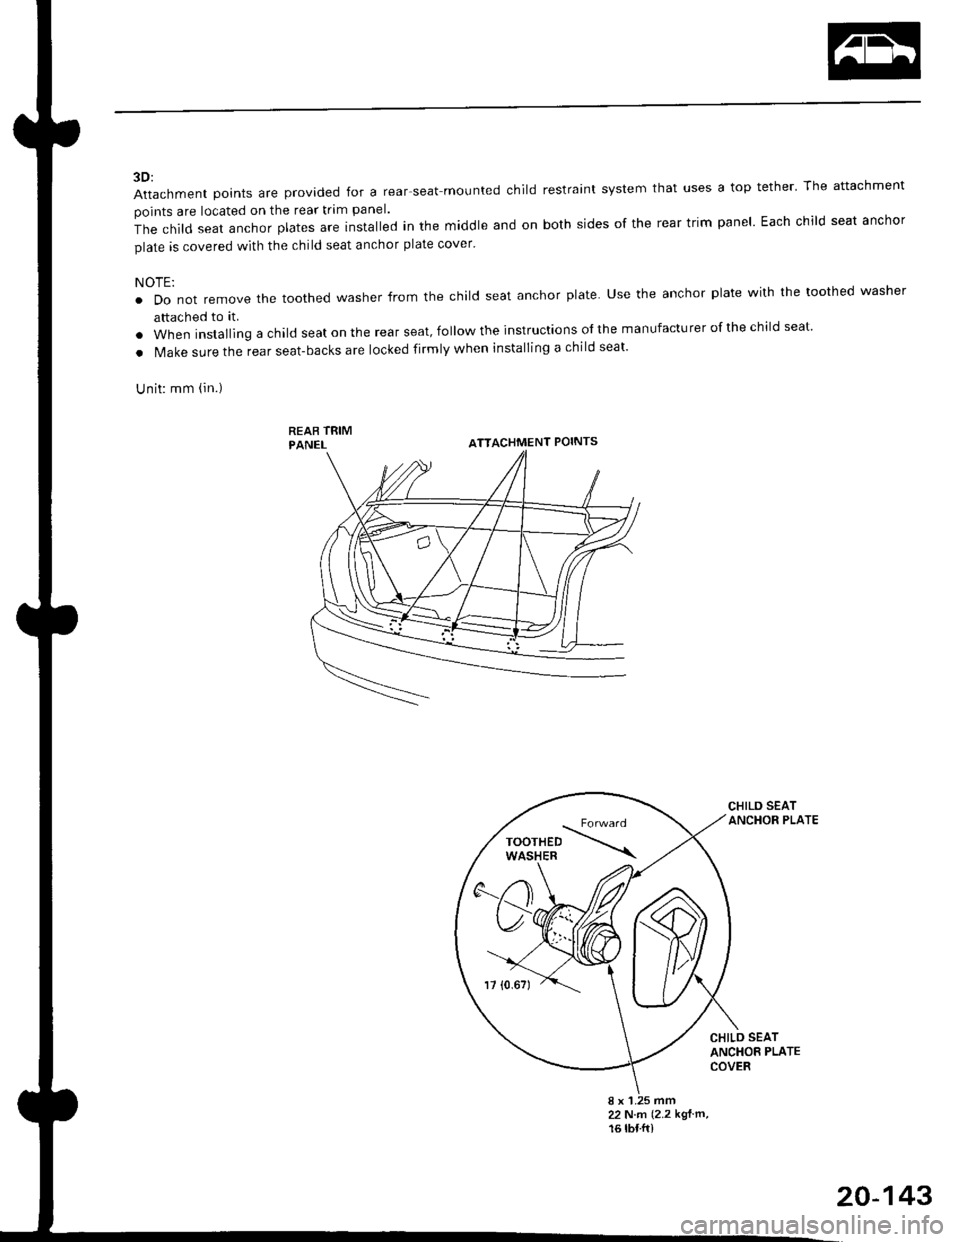 HONDA CIVIC 1999 6.G Workshop Manual 3D:
Attachment points are provided for a rear-seat mounted child restraint system that uses a top tether The attachment
points are located on the rear trim panel.
The child seat anchor plates are rns